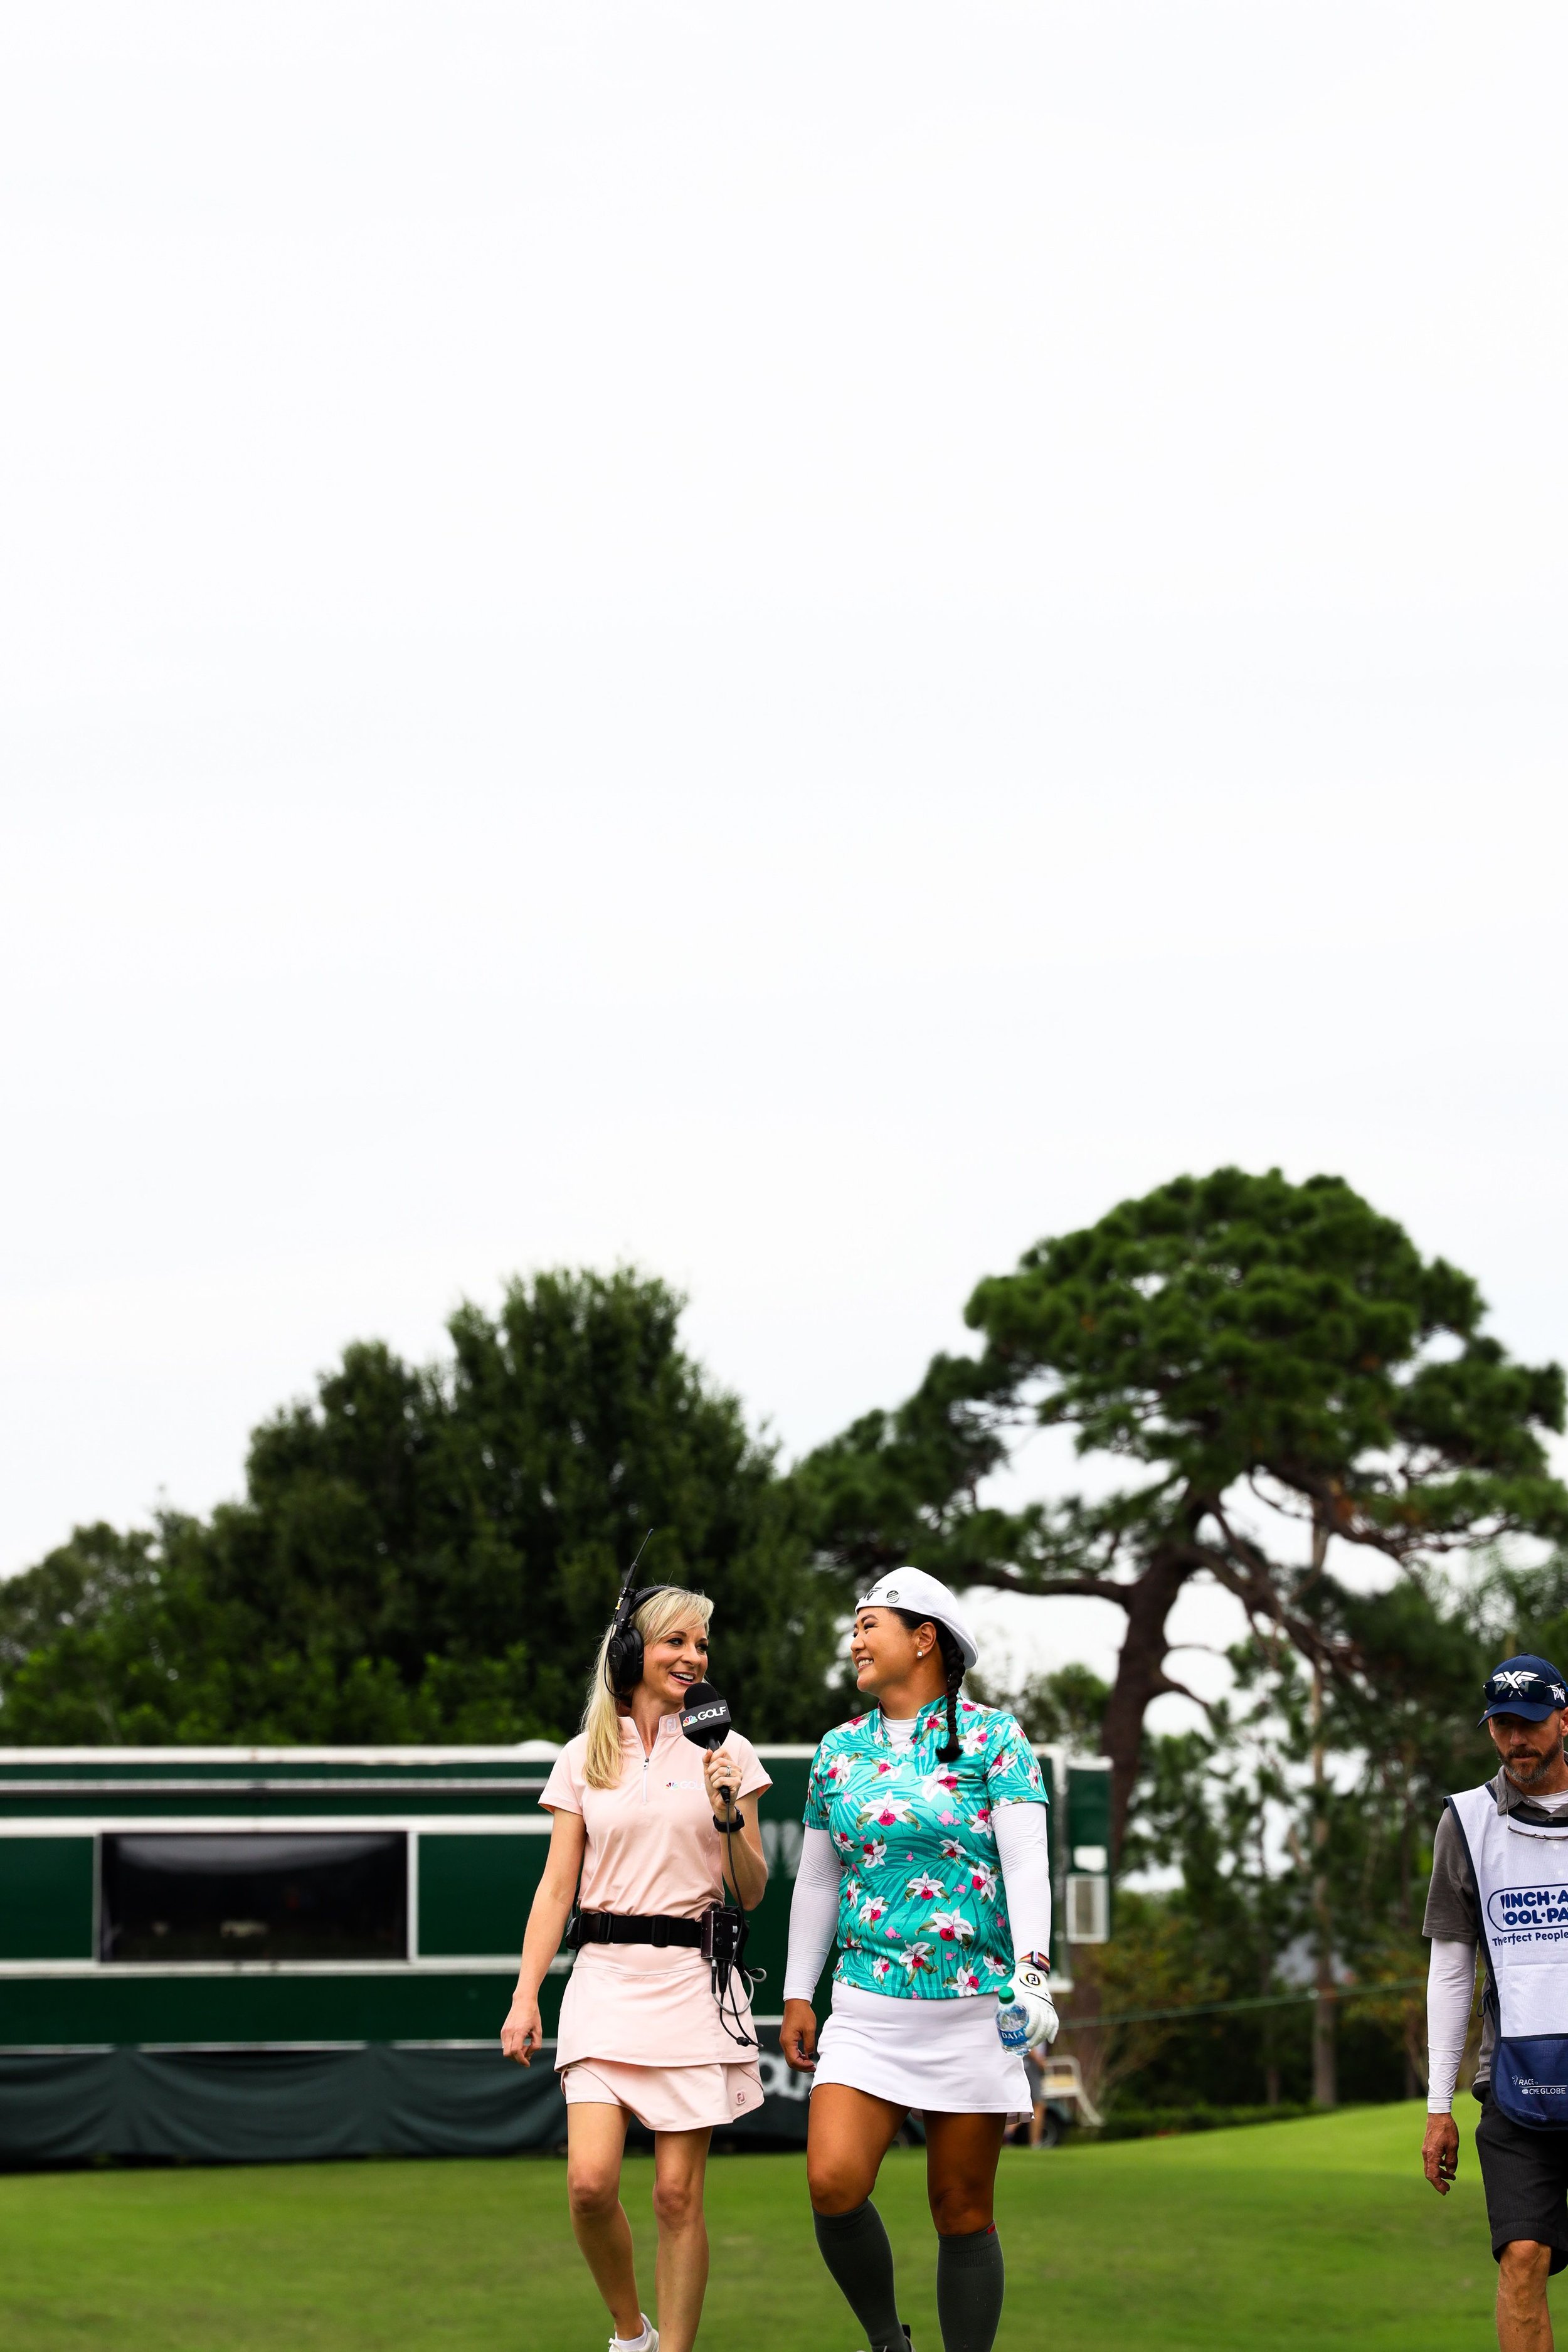  Female golf athlete smiling and walking while being interviewed by journalist. 